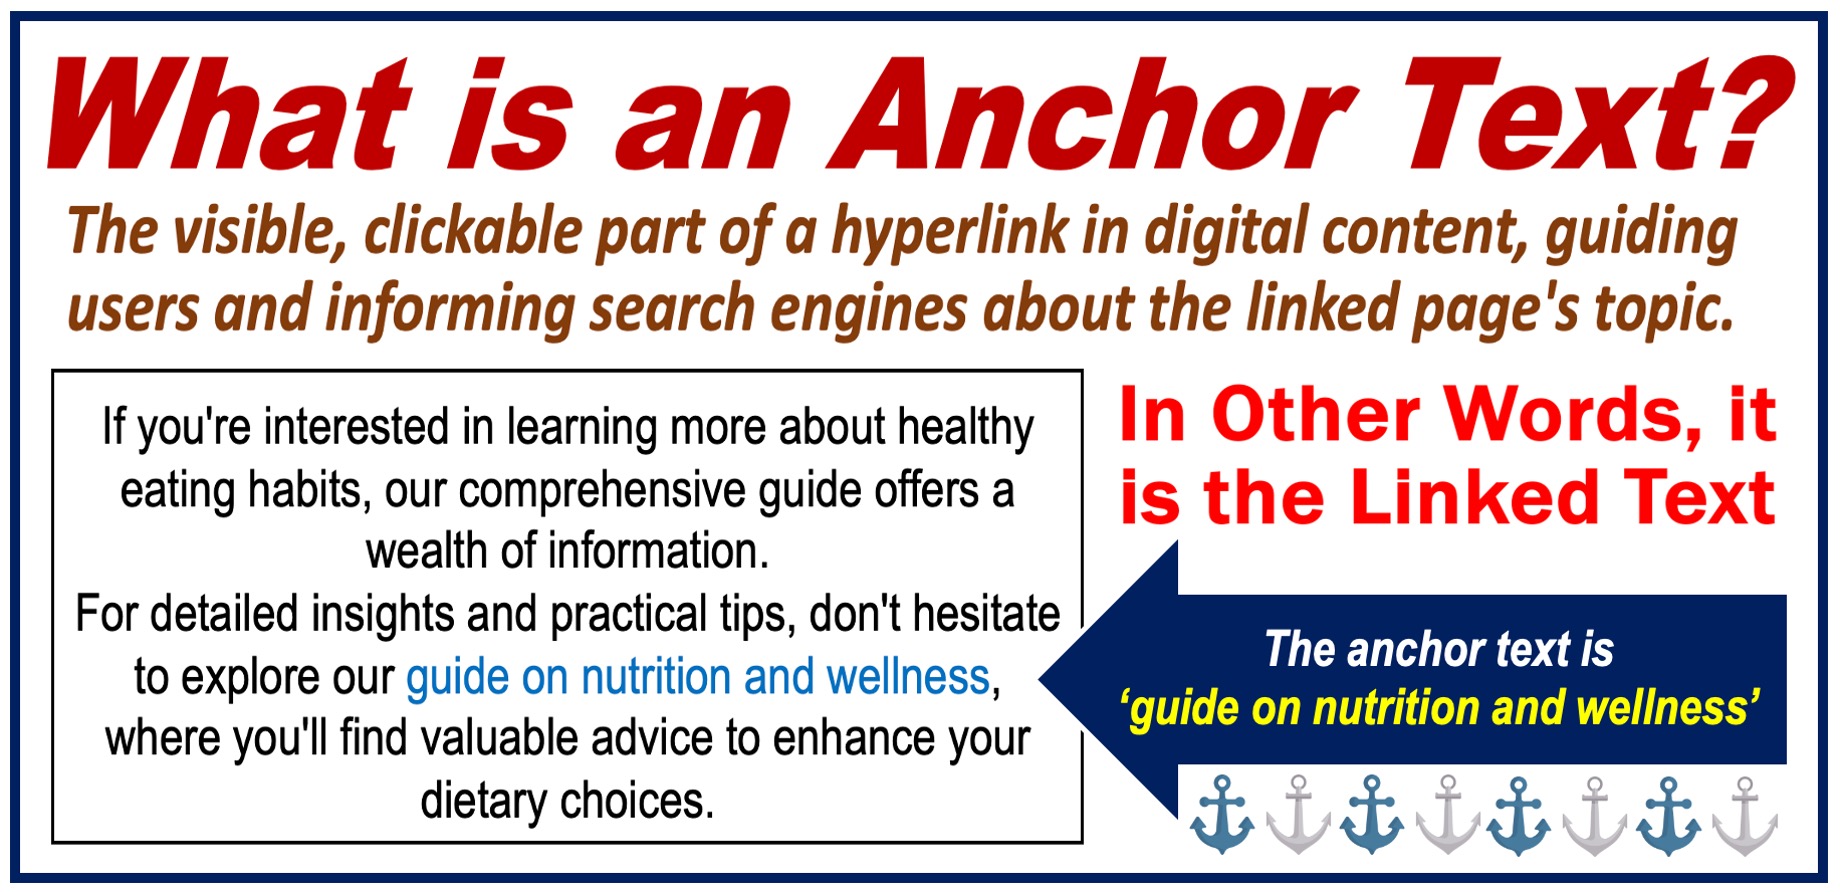 Image with a definition and example of ANCHOR TEXT.